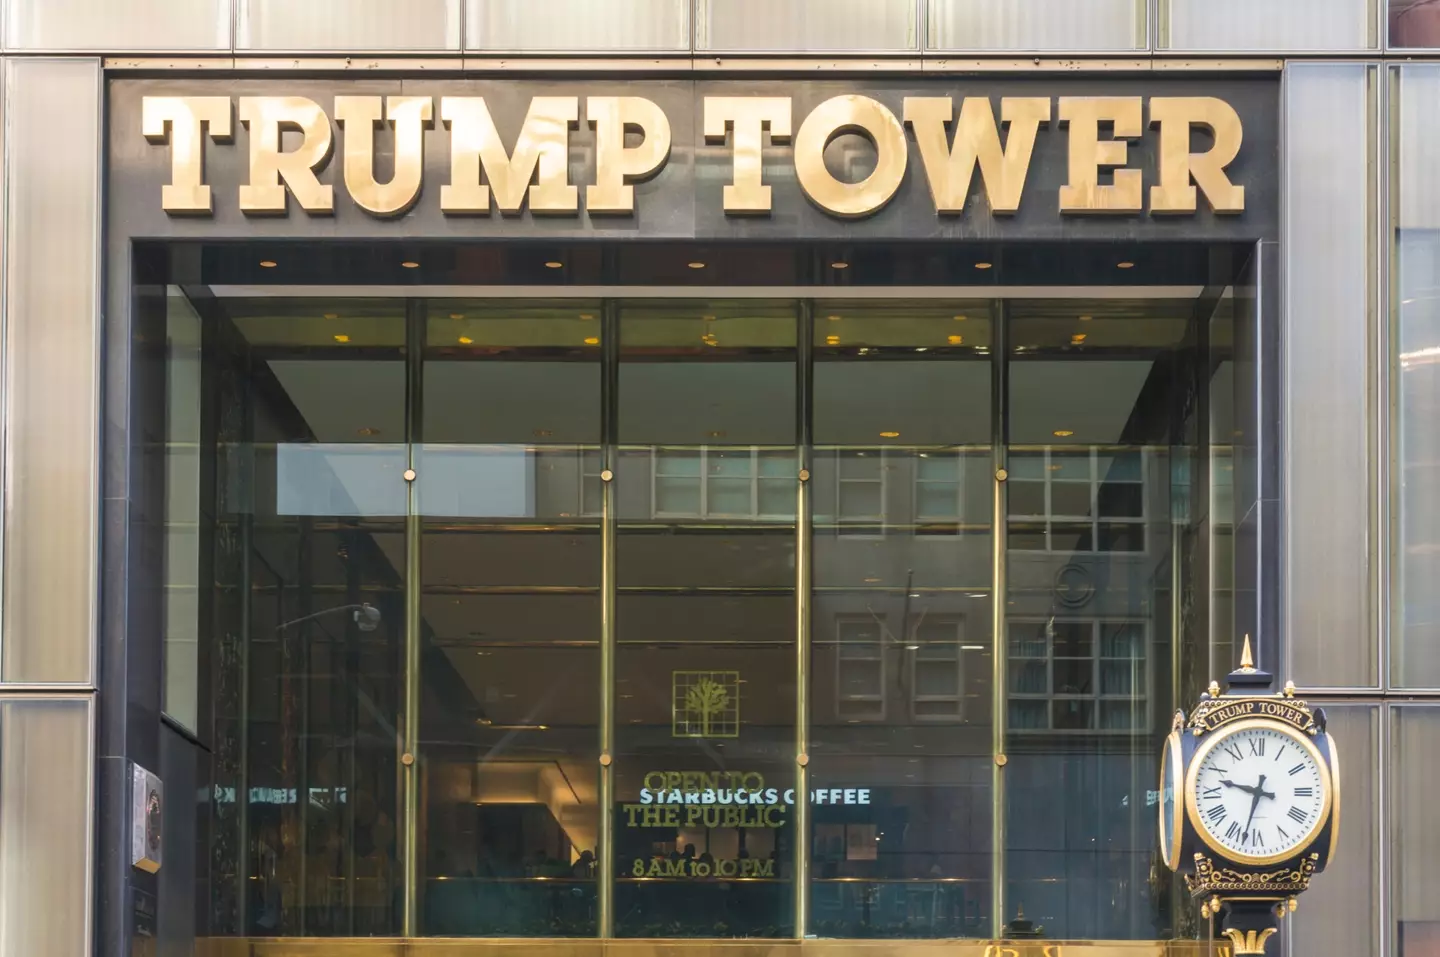 The protest happened outside Trump Tower in 2015.